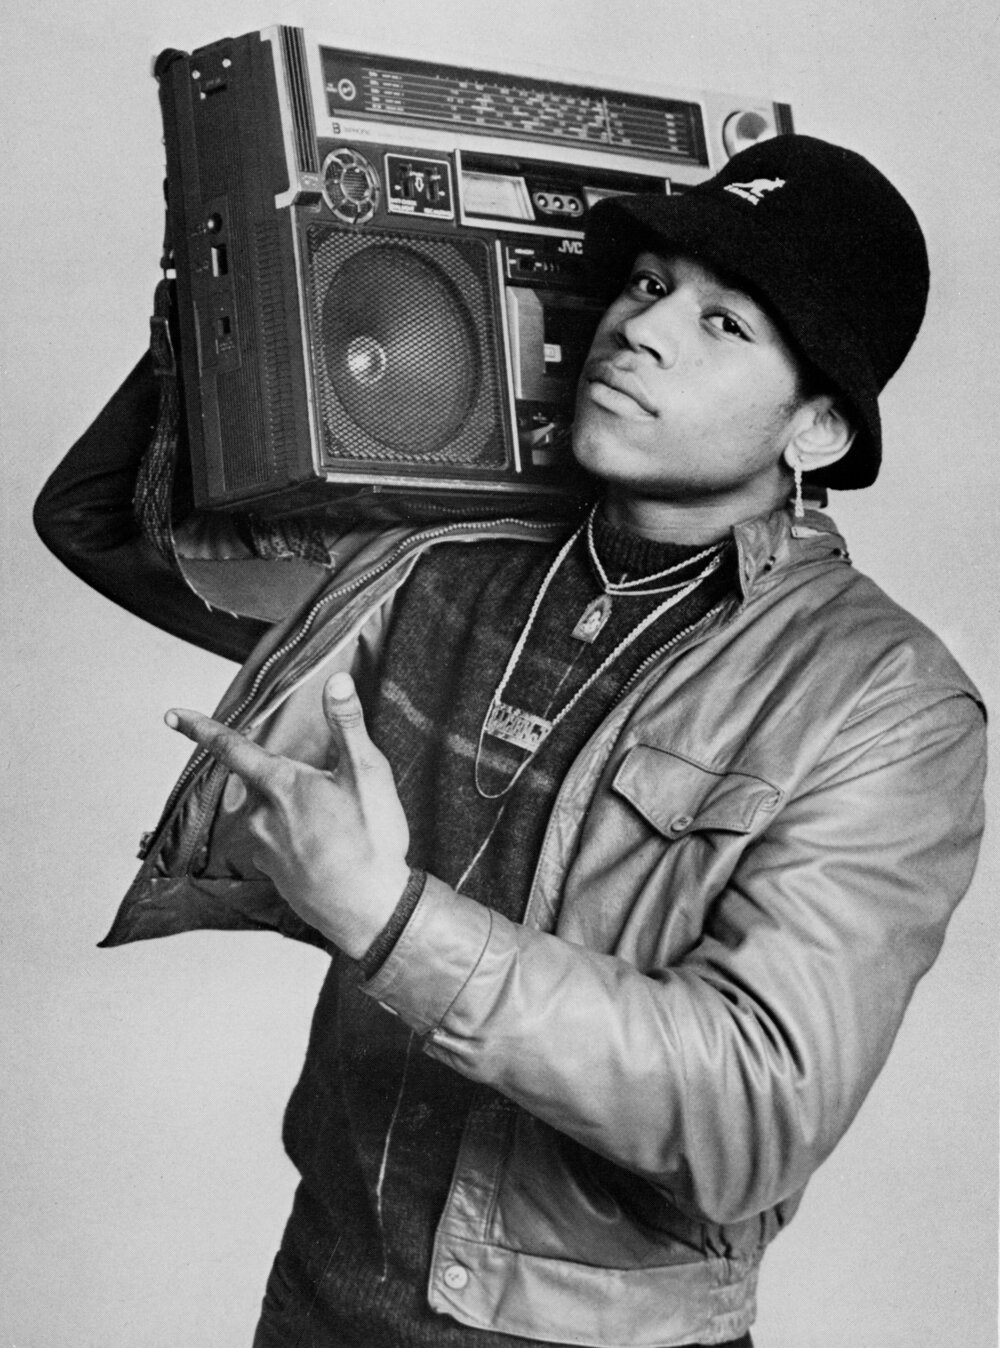 LL Cool J photographed by Janette Beckman in 1985